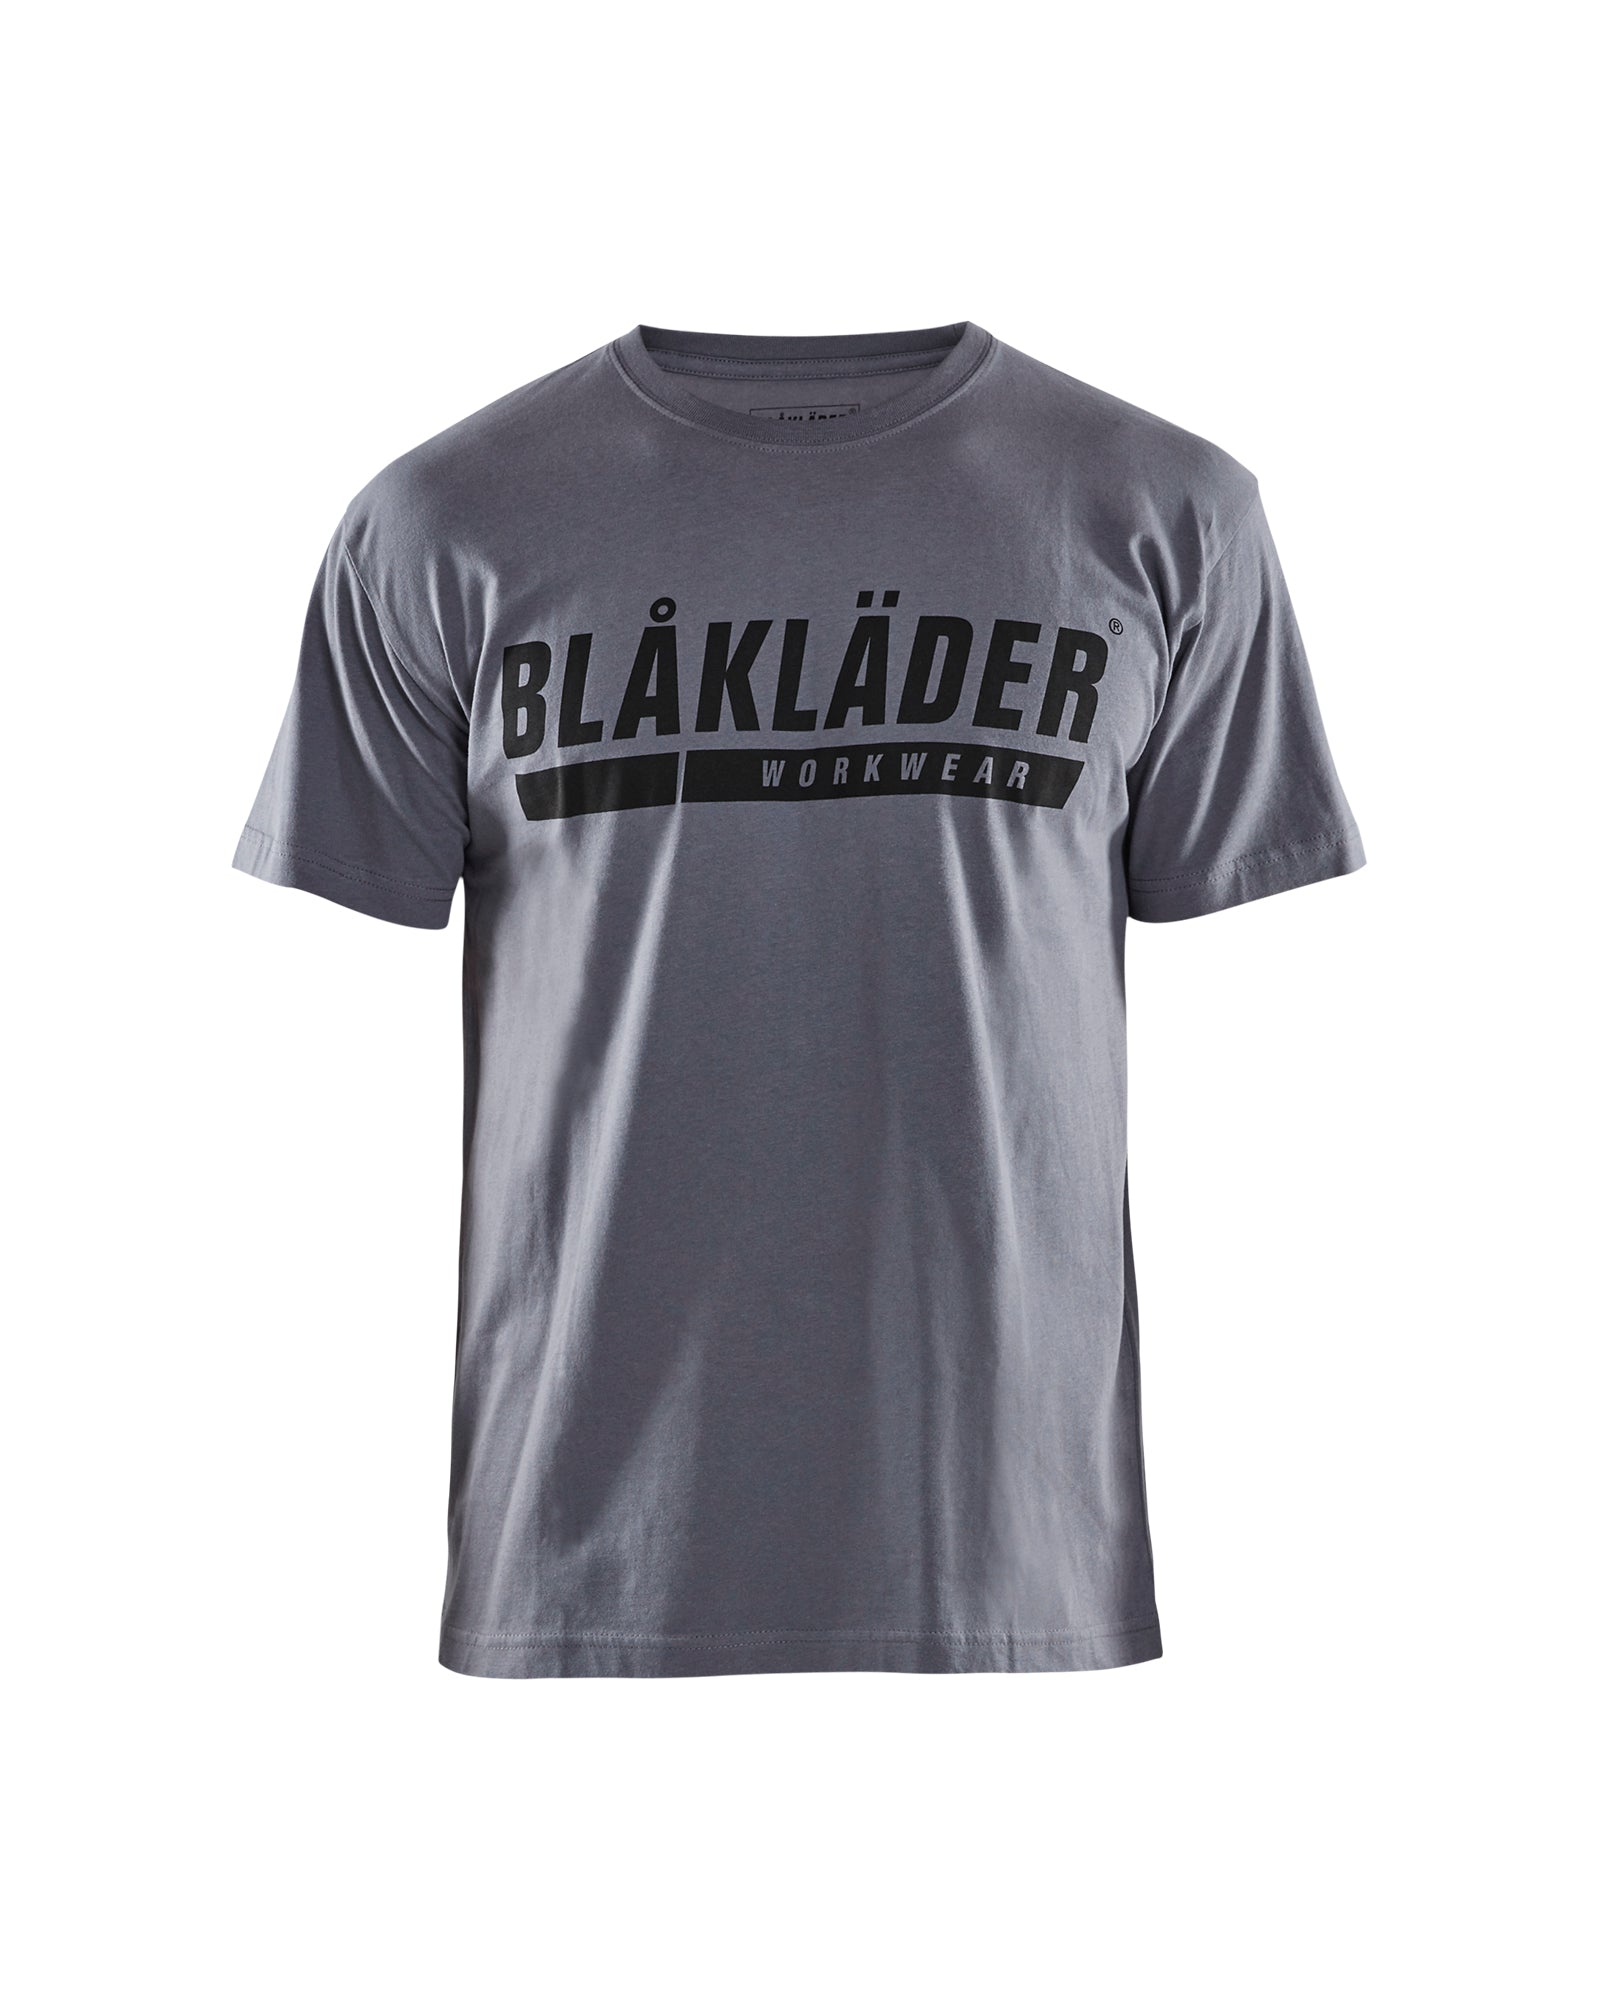 Men's Blaklader US Short Sleeves with Logo T-Shirt in Grey from the front view